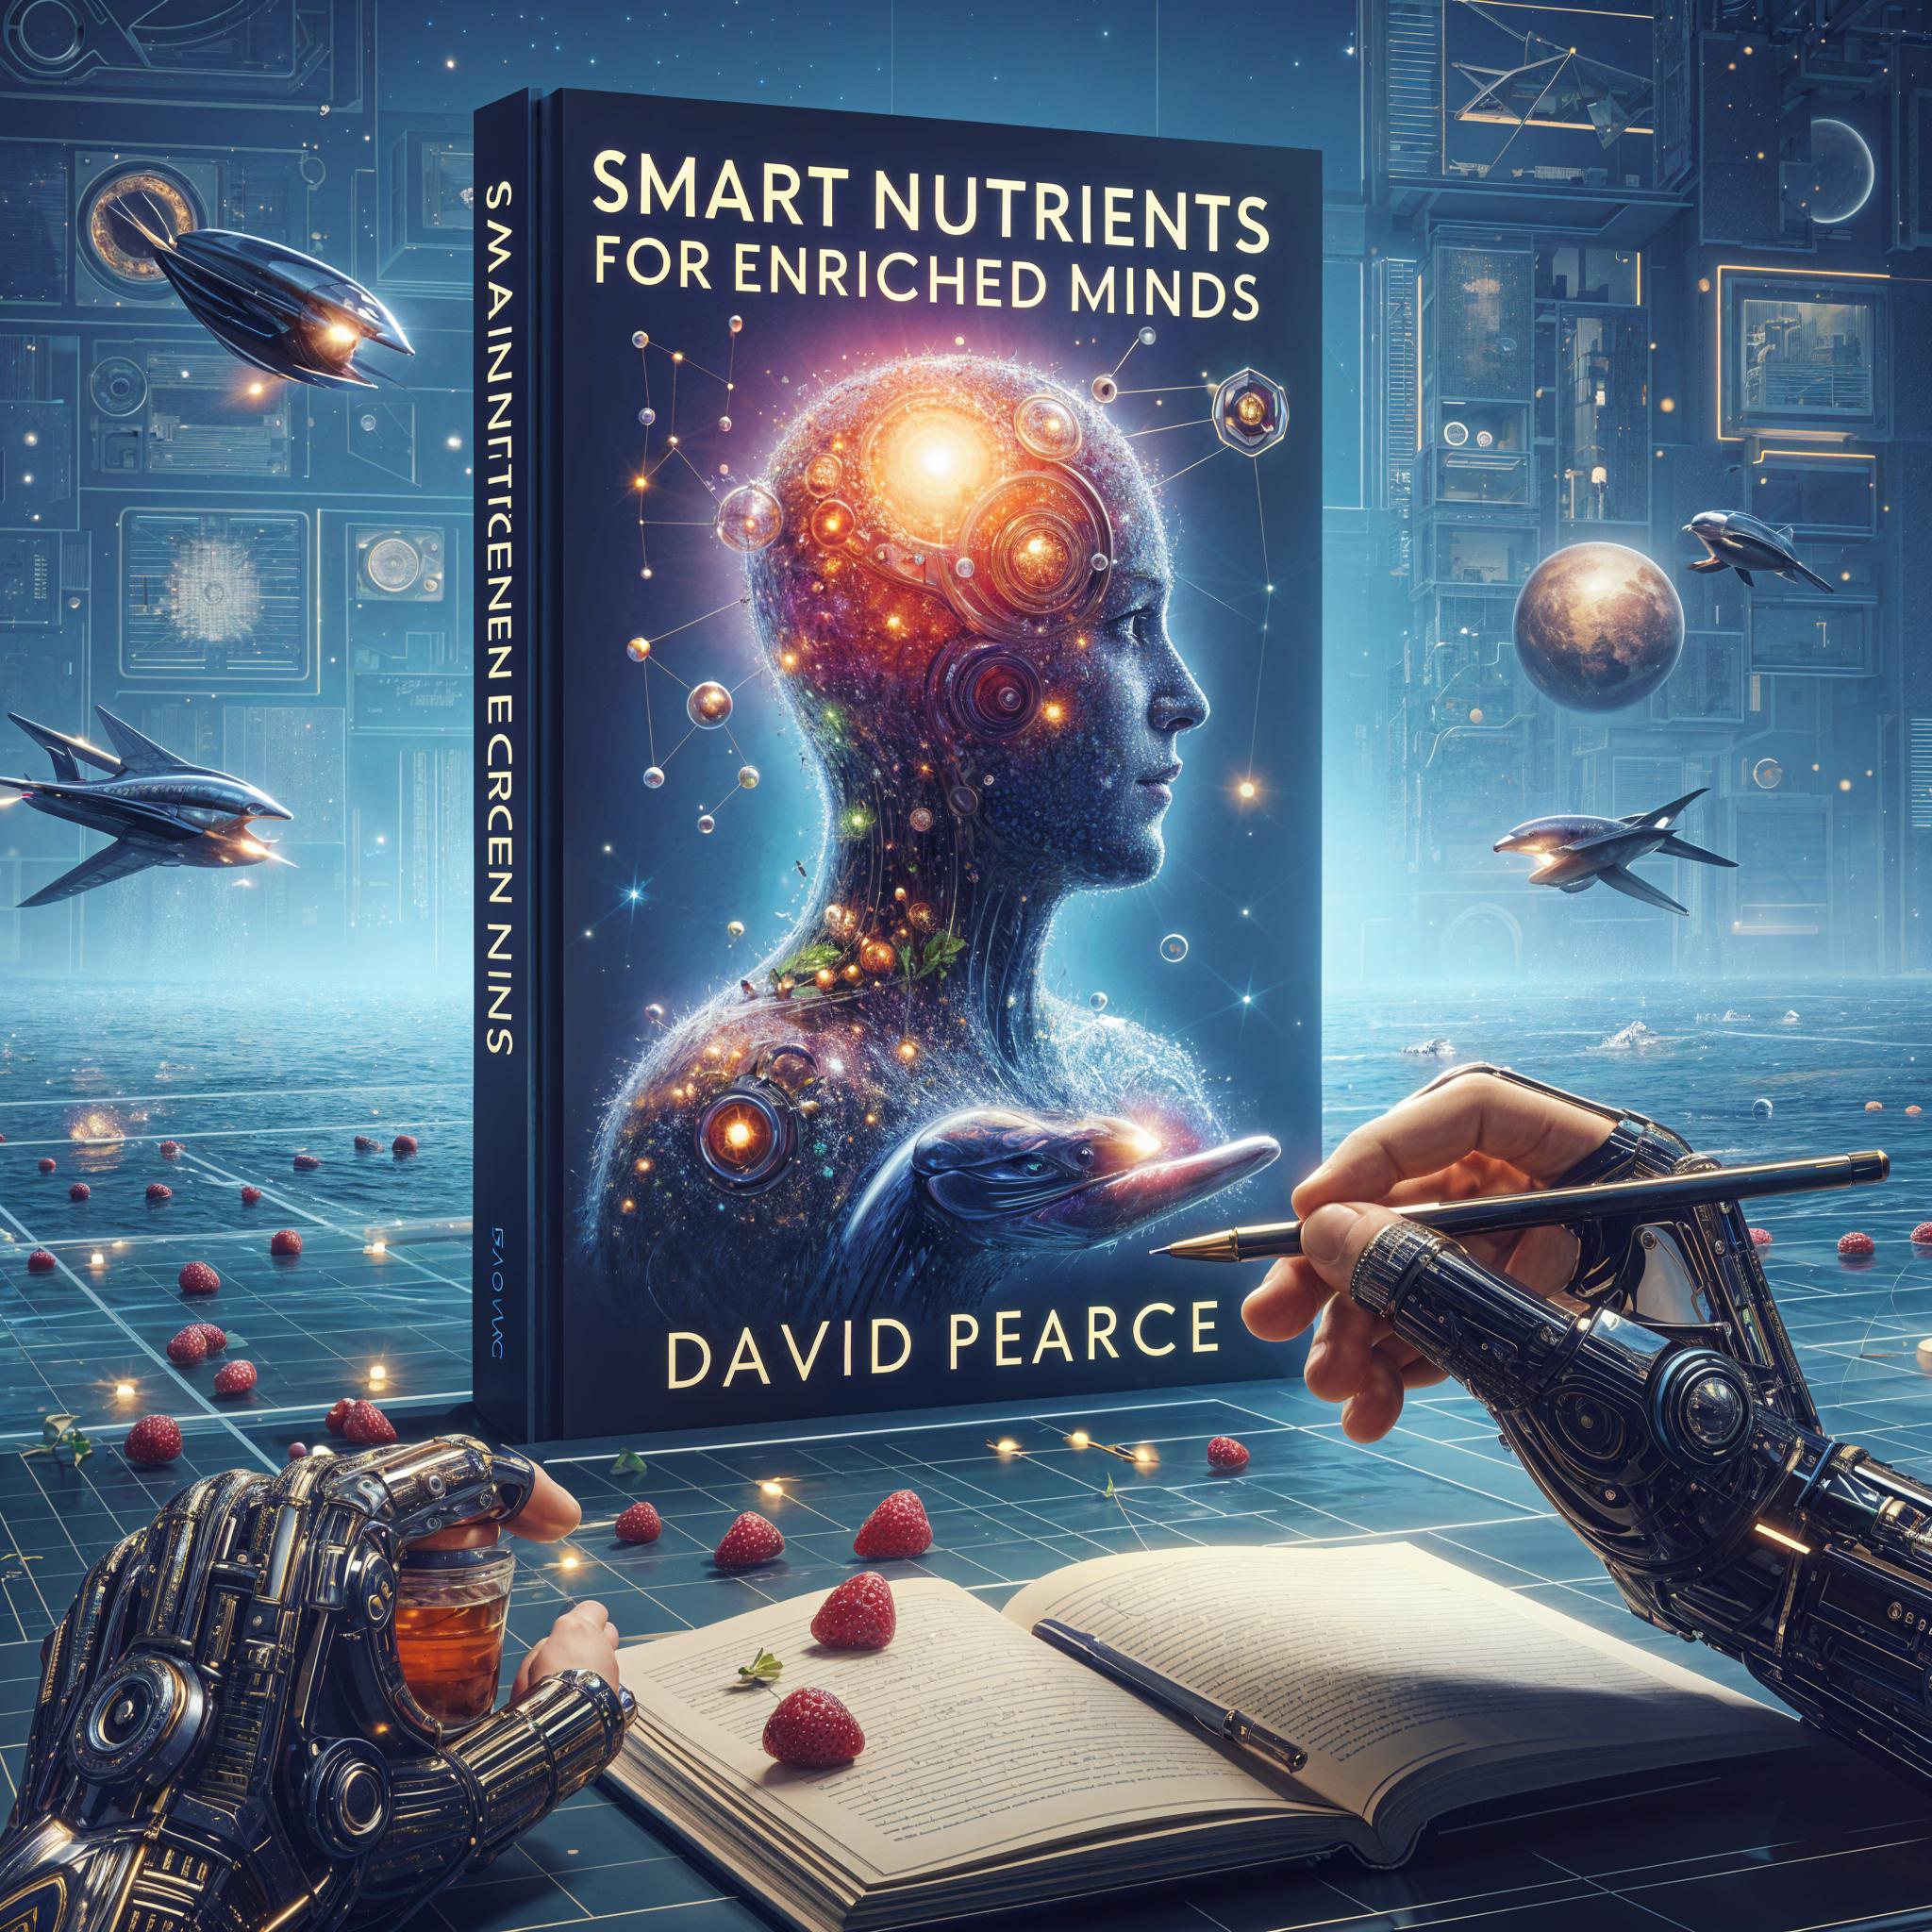 Smart Nutrients For Enriched Minds by David Pearce